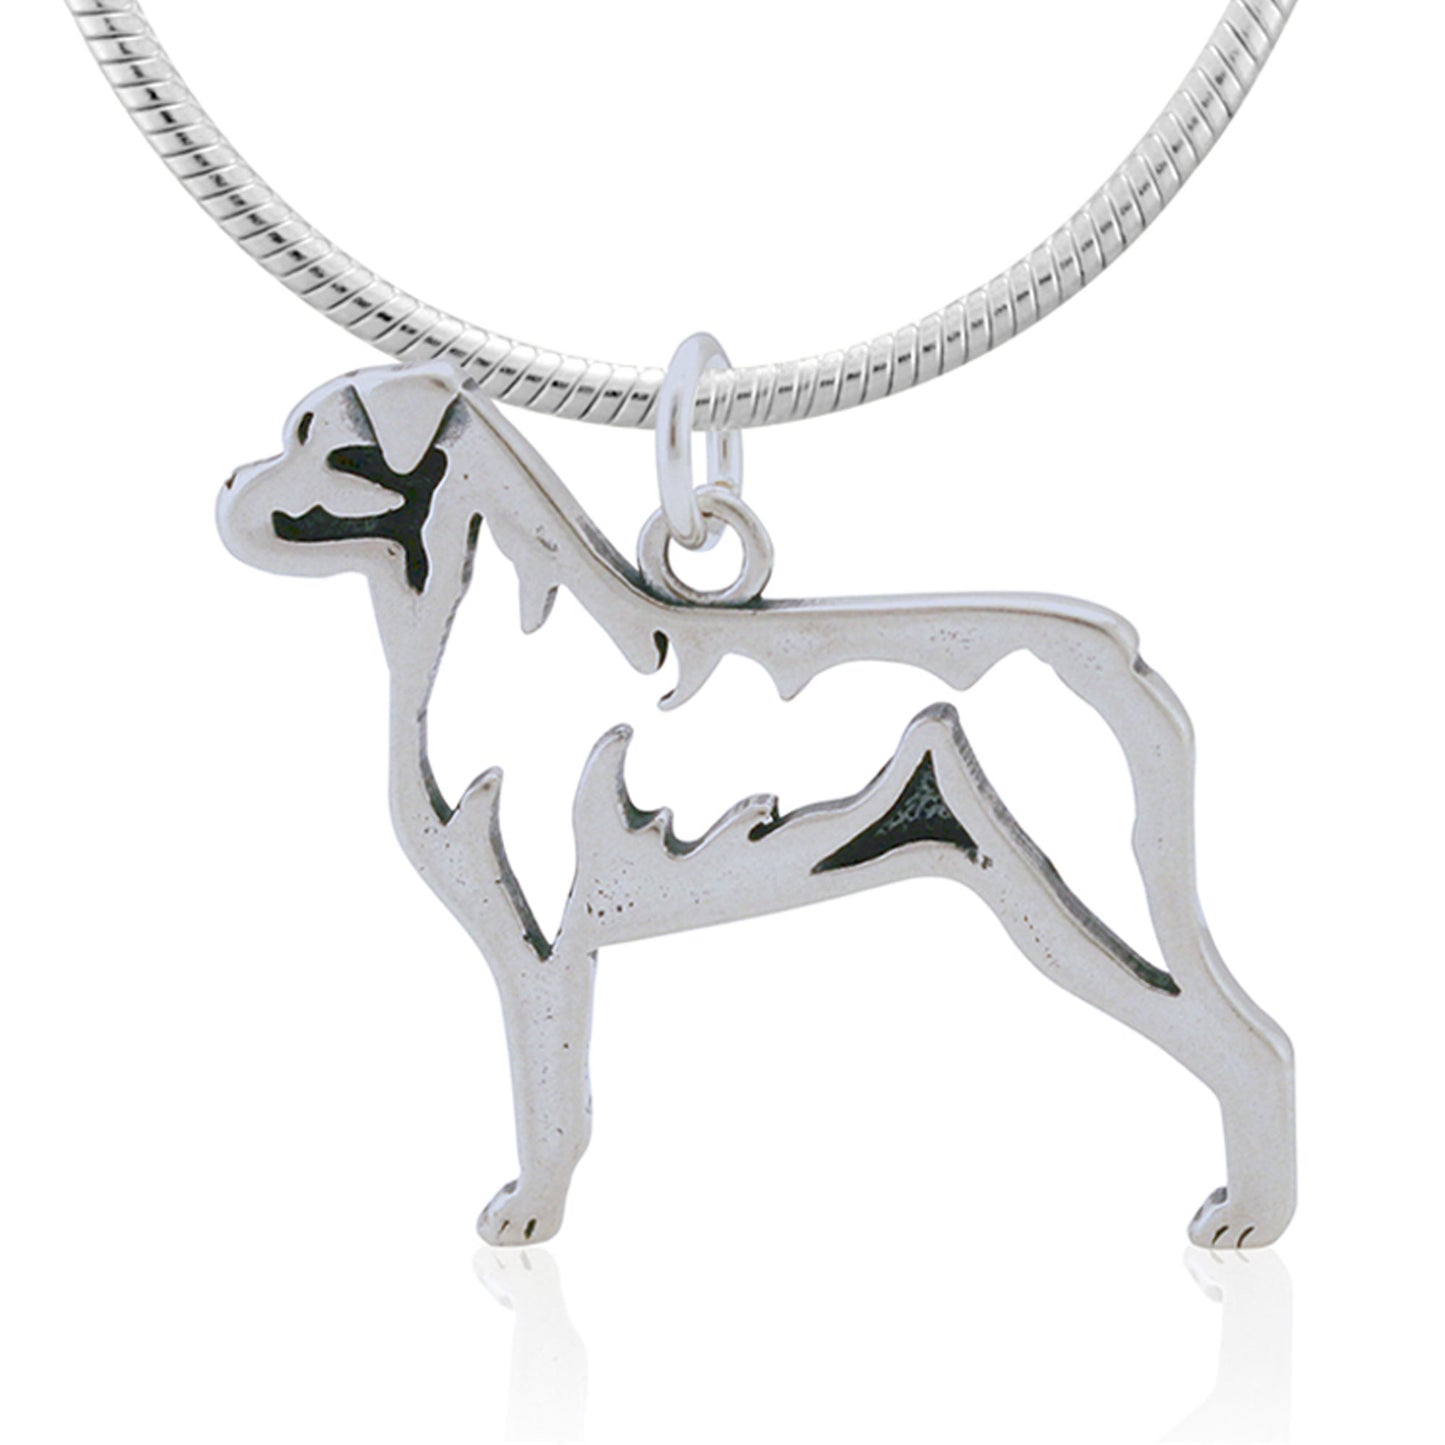 Recycled Sterling Dog Breed Necklace